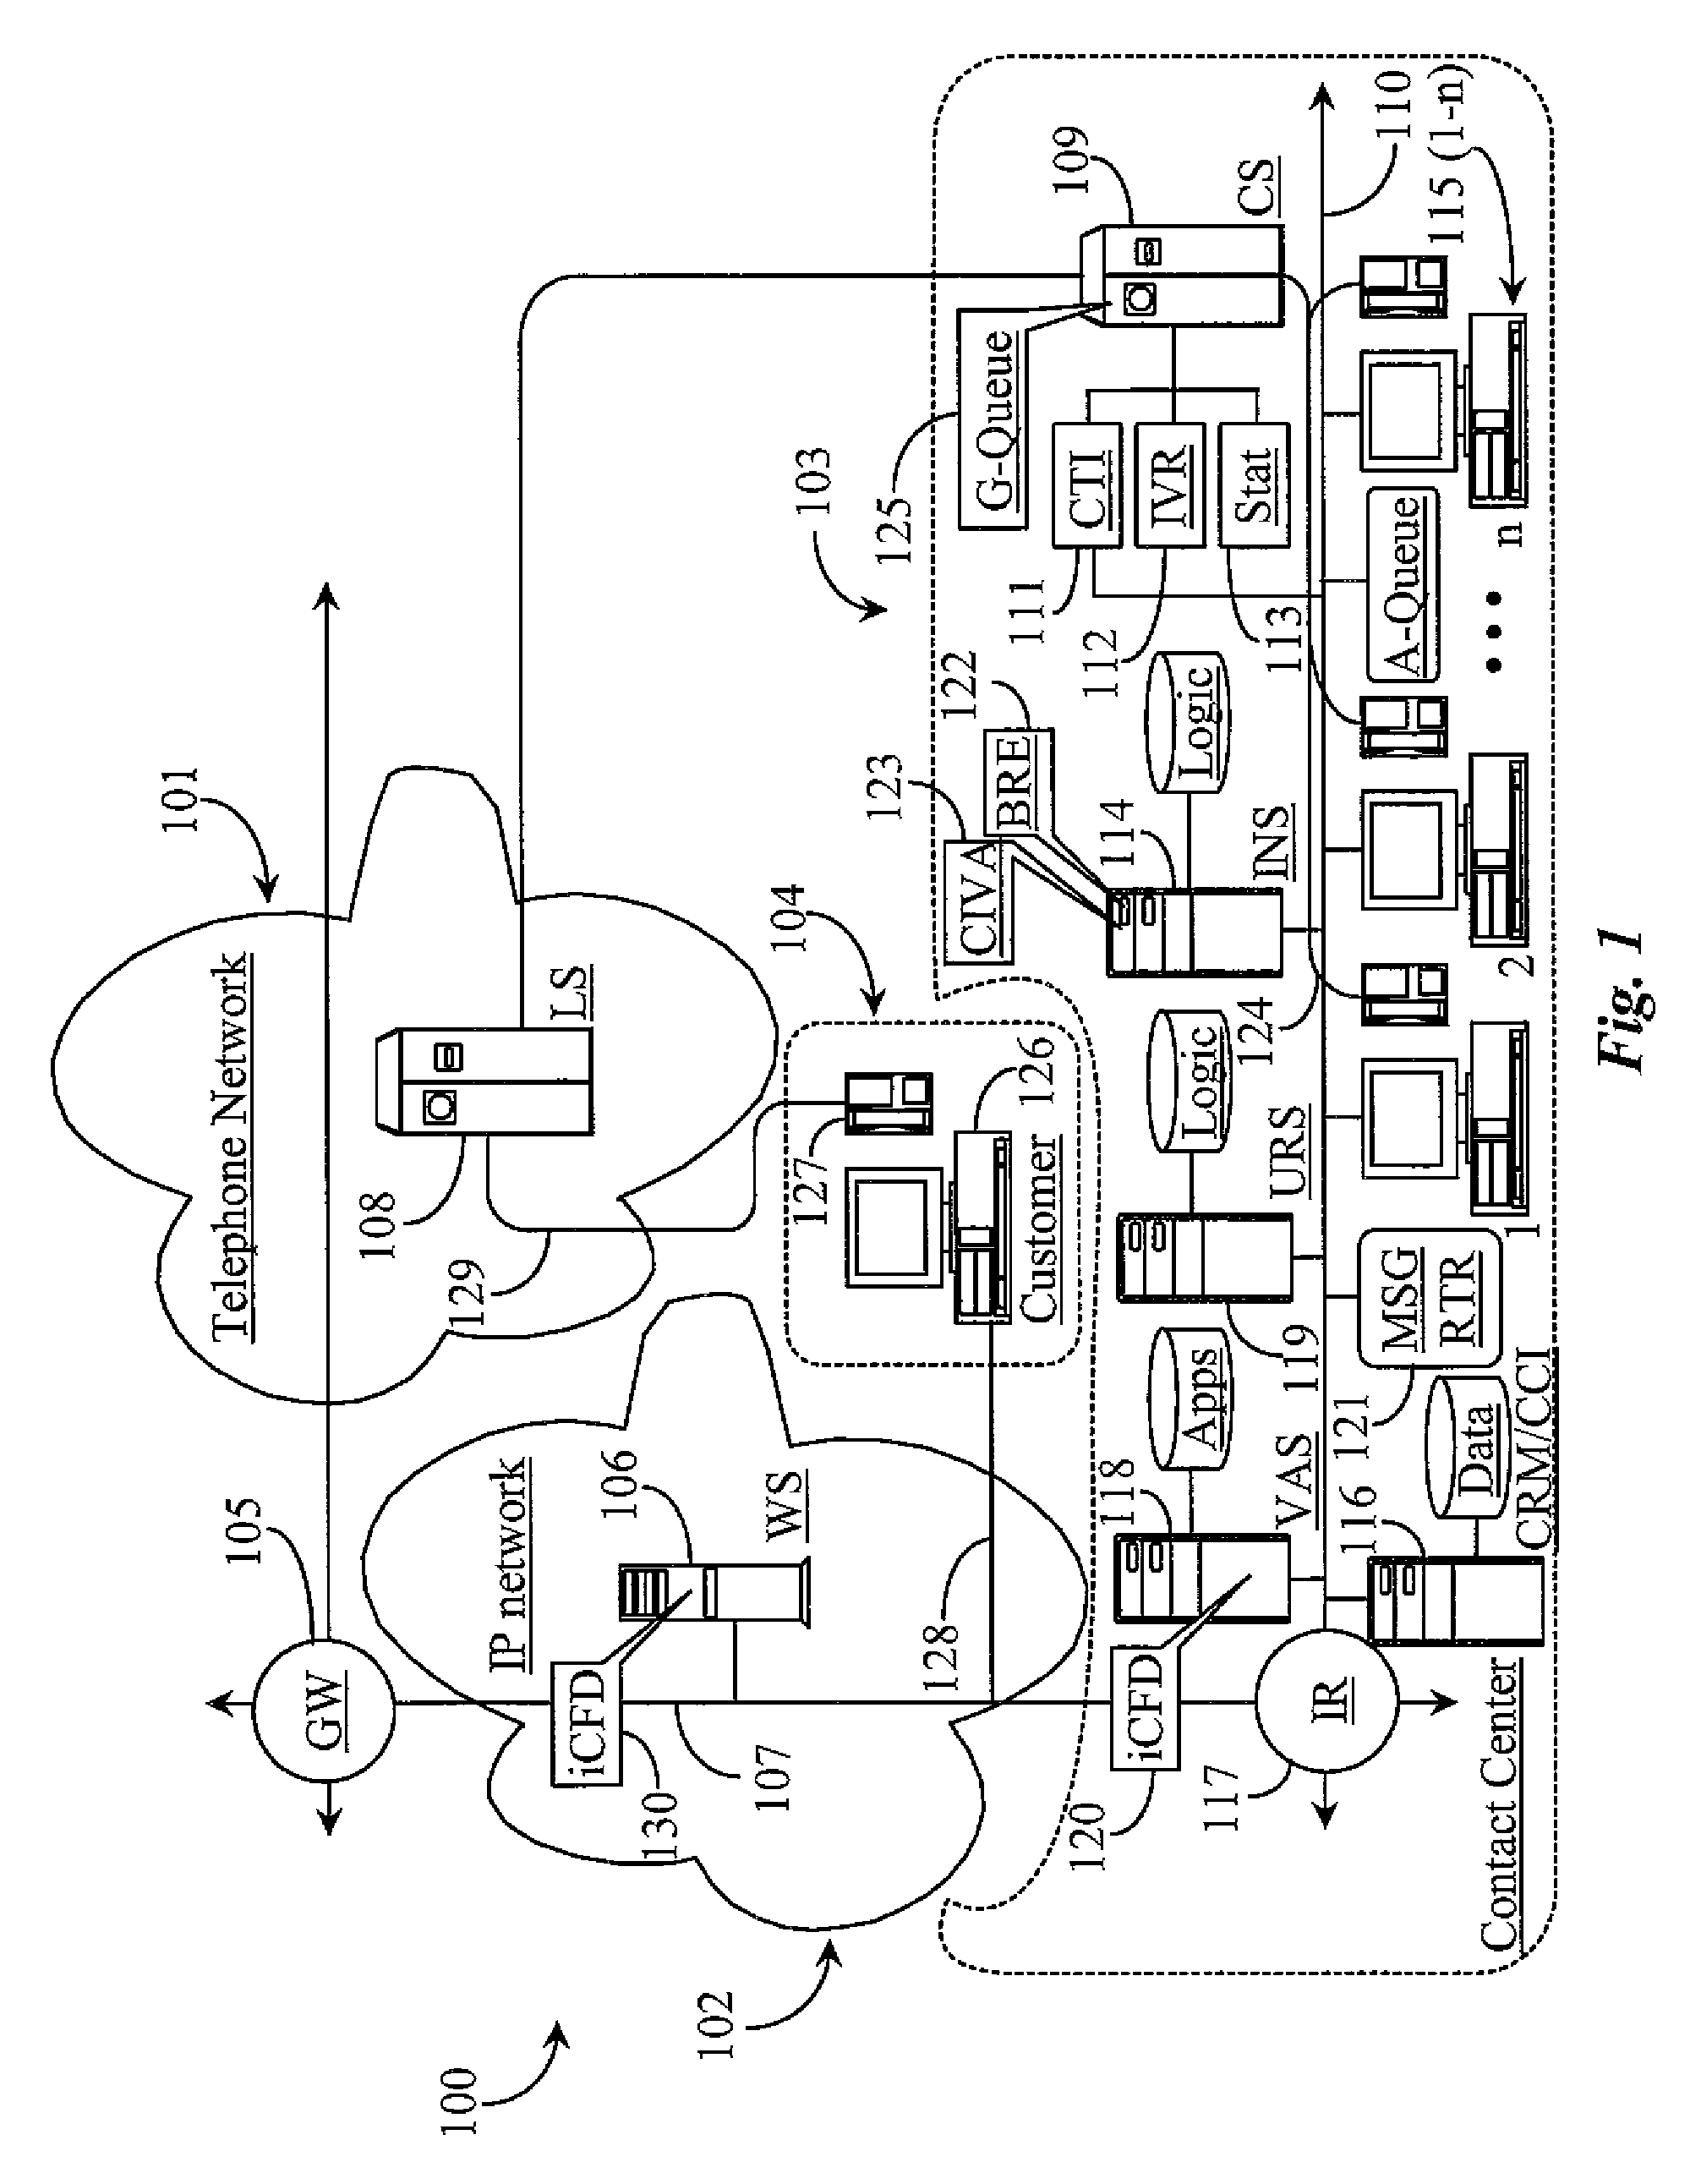 System and methods for tracking unresolved customer involvement with a service organization and automatically formulating a dynamic service solution